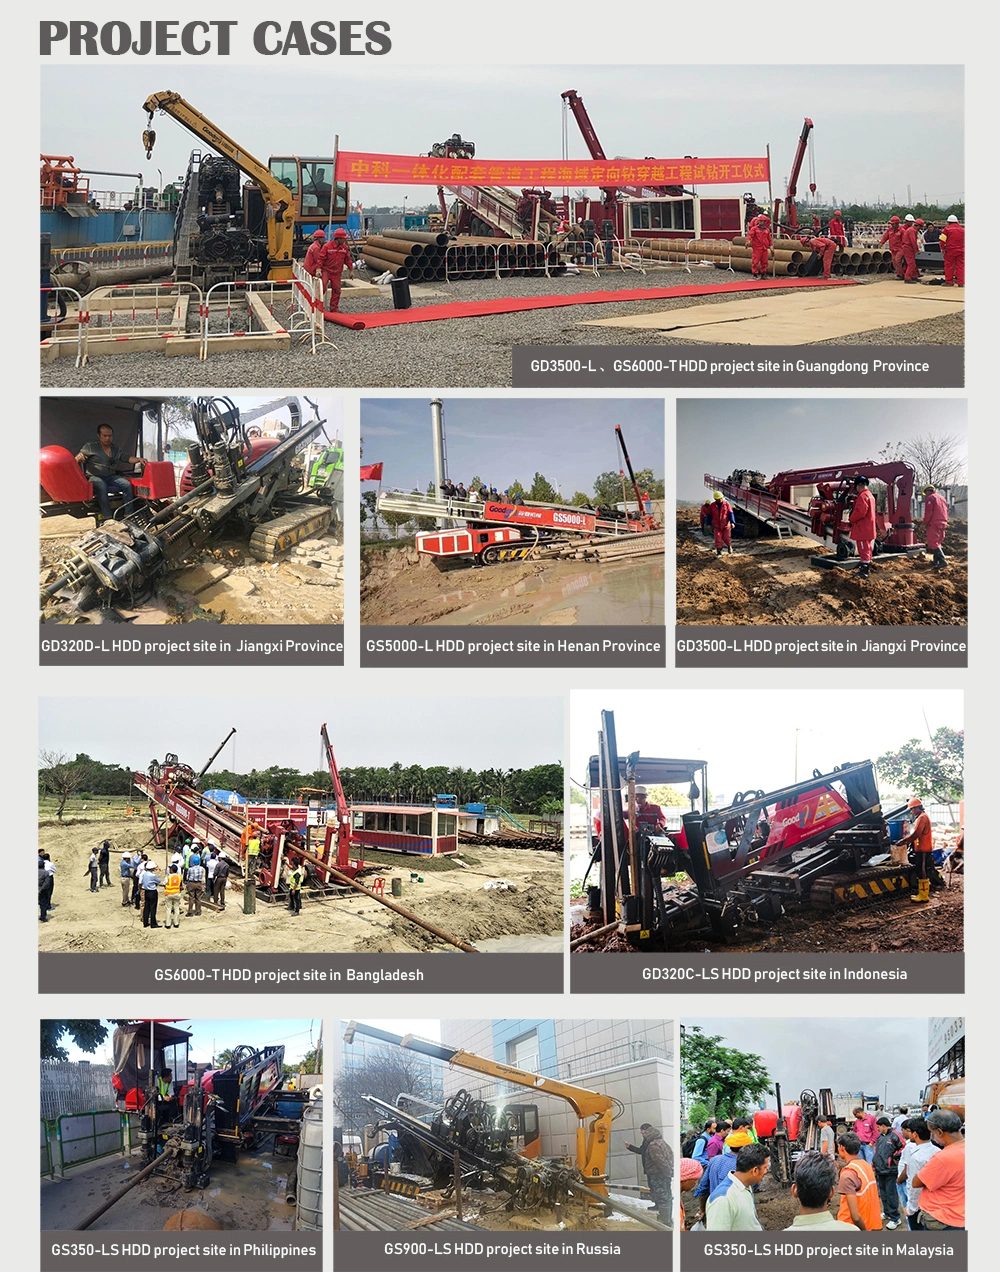 GD 32T(C) horizontal directional drilling rig for underground drilling/pipe laying